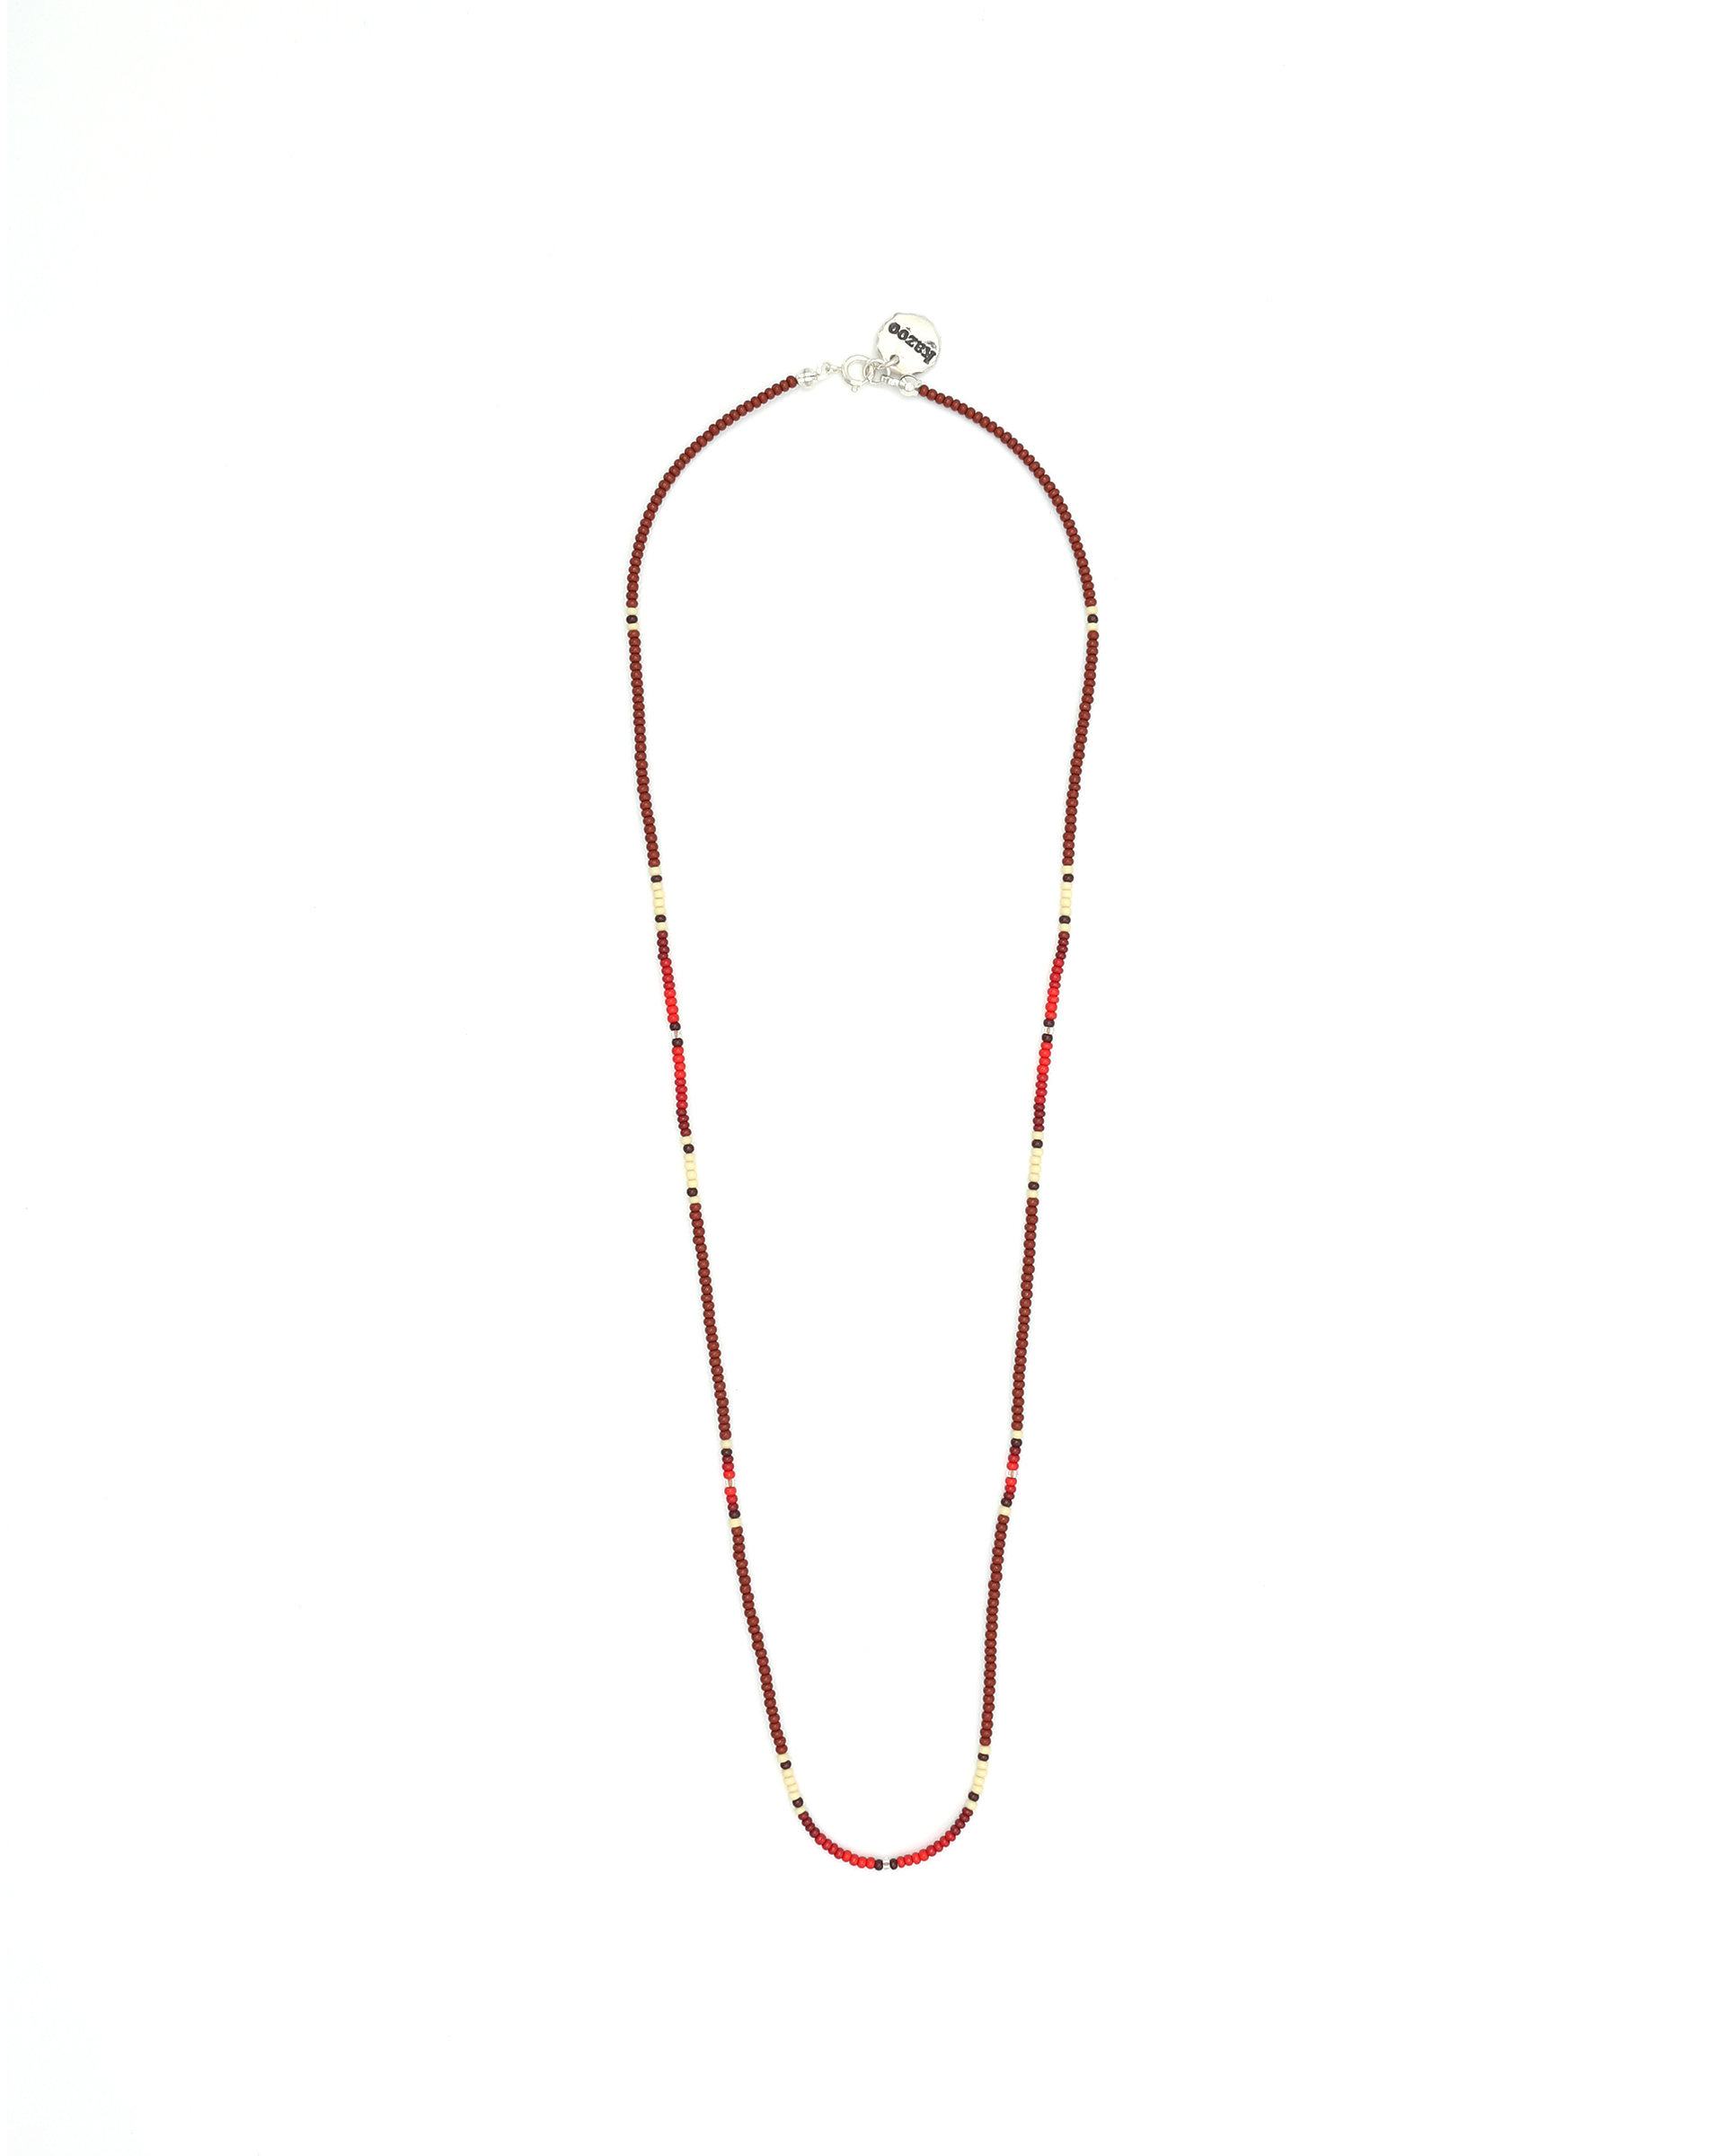 RED - MAROON / BEADS NECKLACE